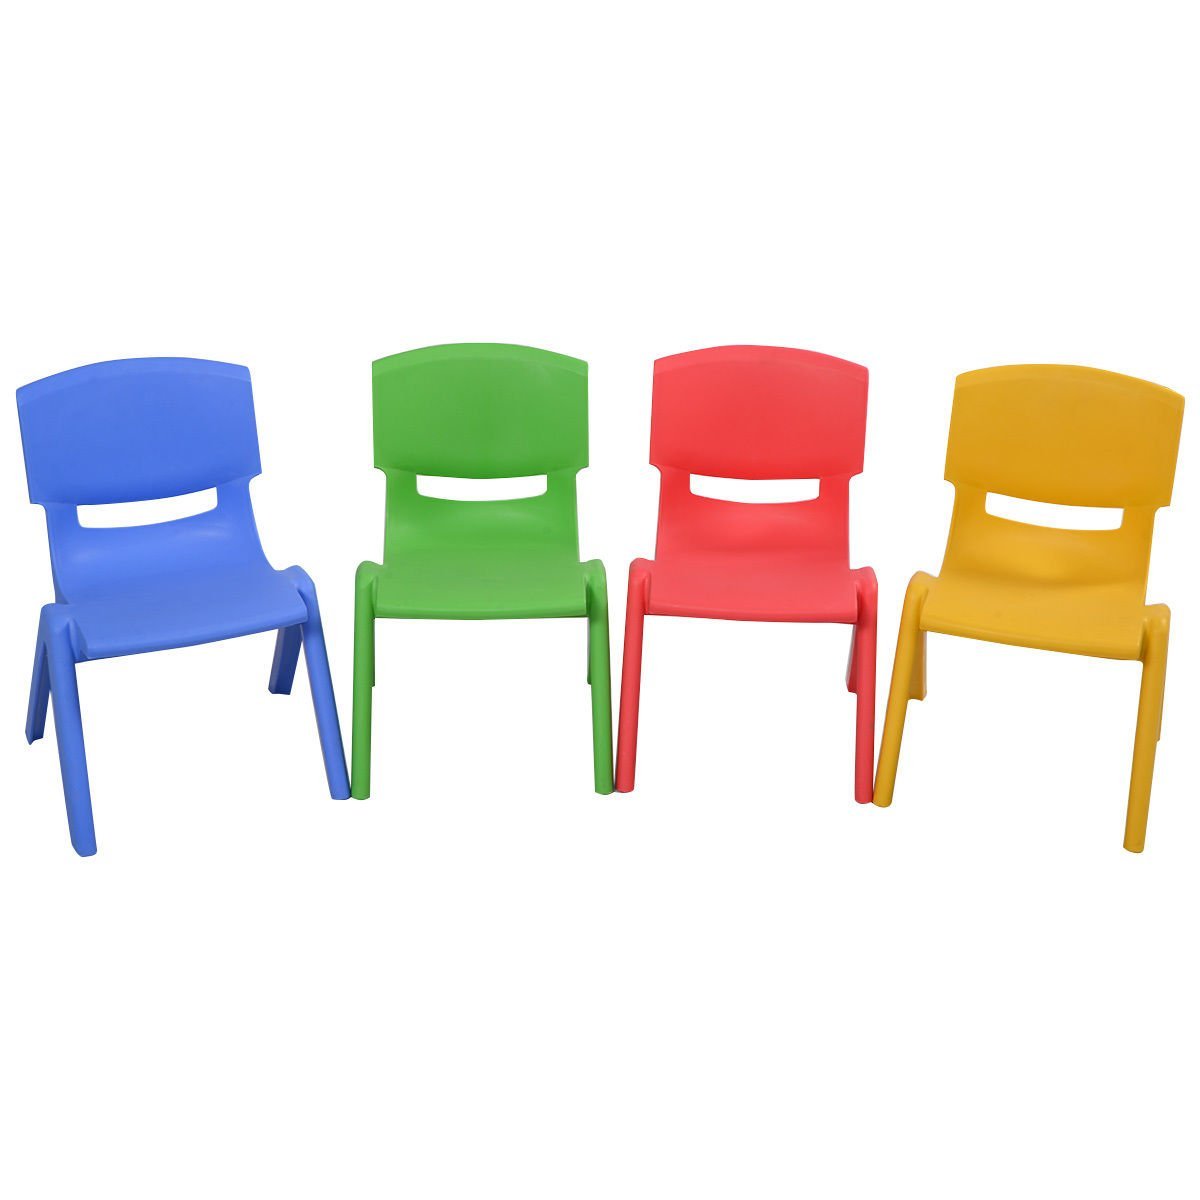 kids chairs amazon.com: costzon set of 4 kids plastic chairs stackable play and learn KWIFVYZ